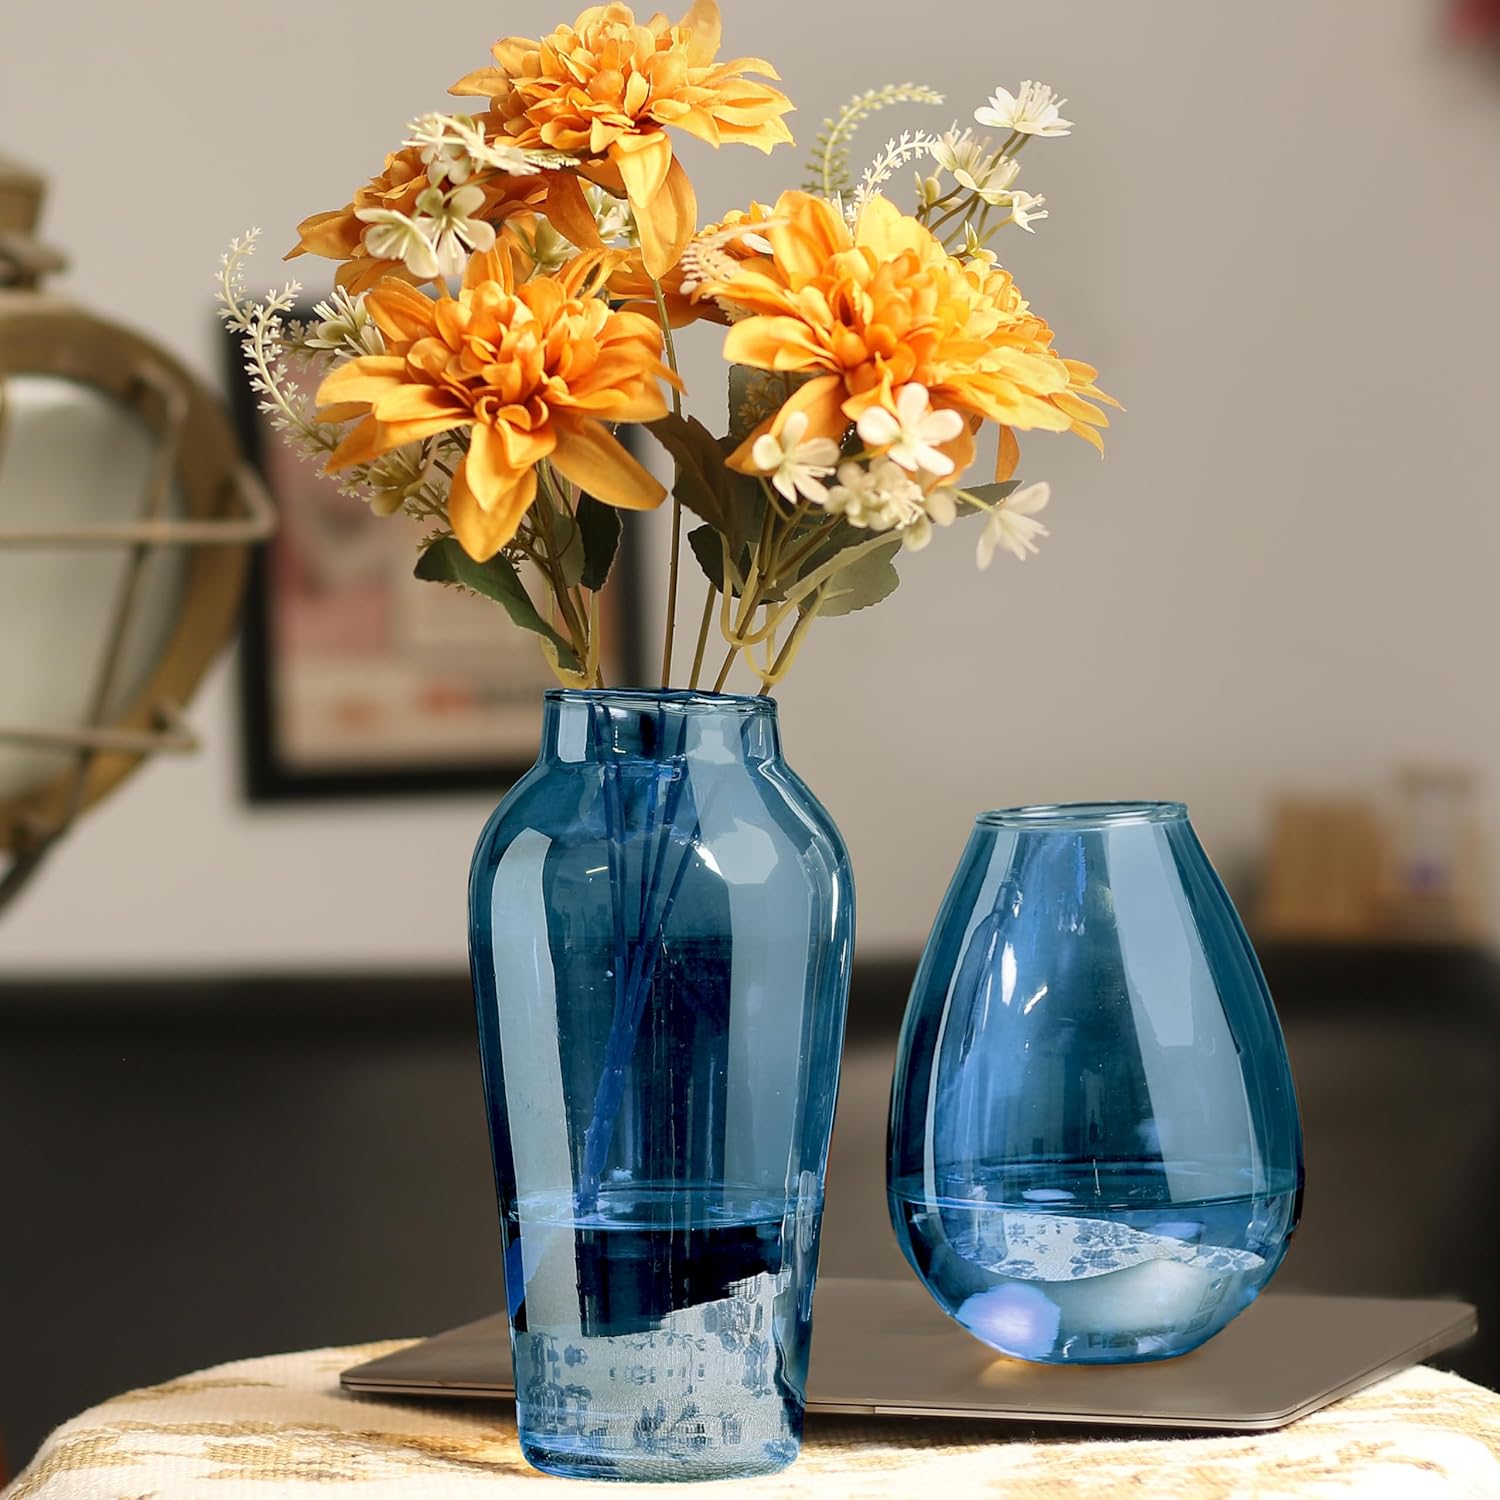 A blue vase with yellow flowers beautifully arranged on a table, adding a touch of color and elegance.